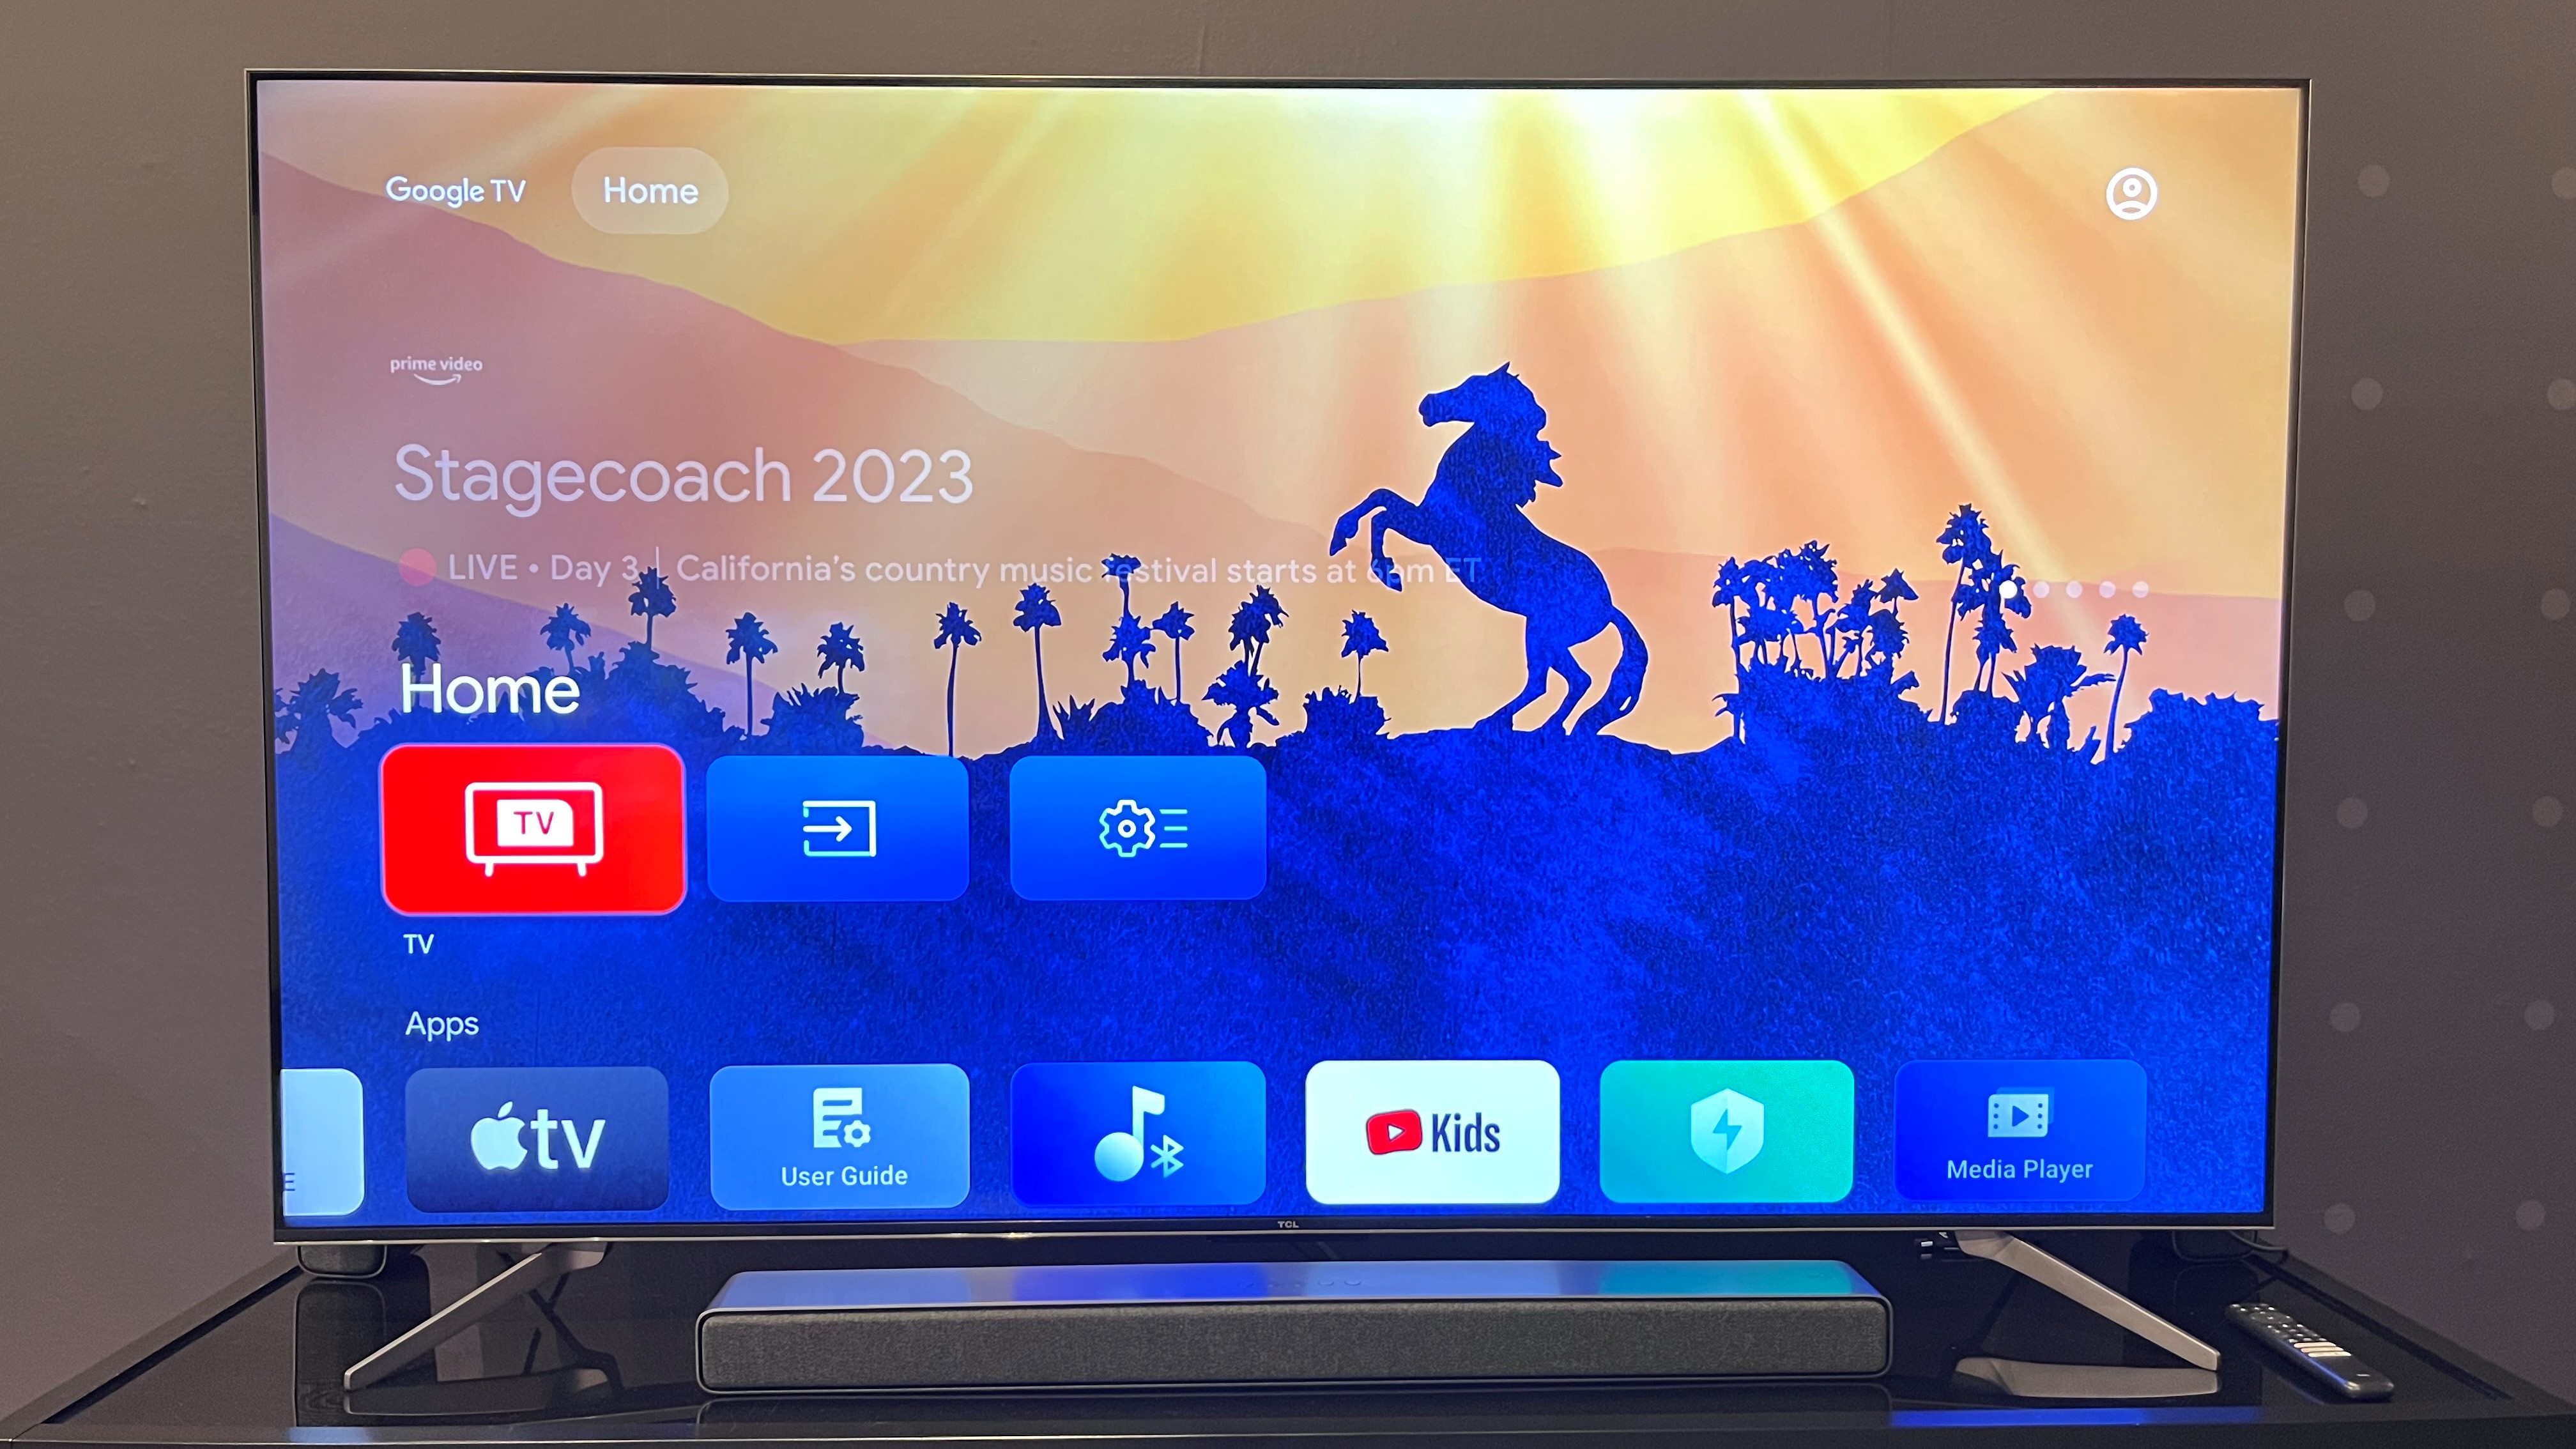 TCL Q7 series TV showing Google TV interface